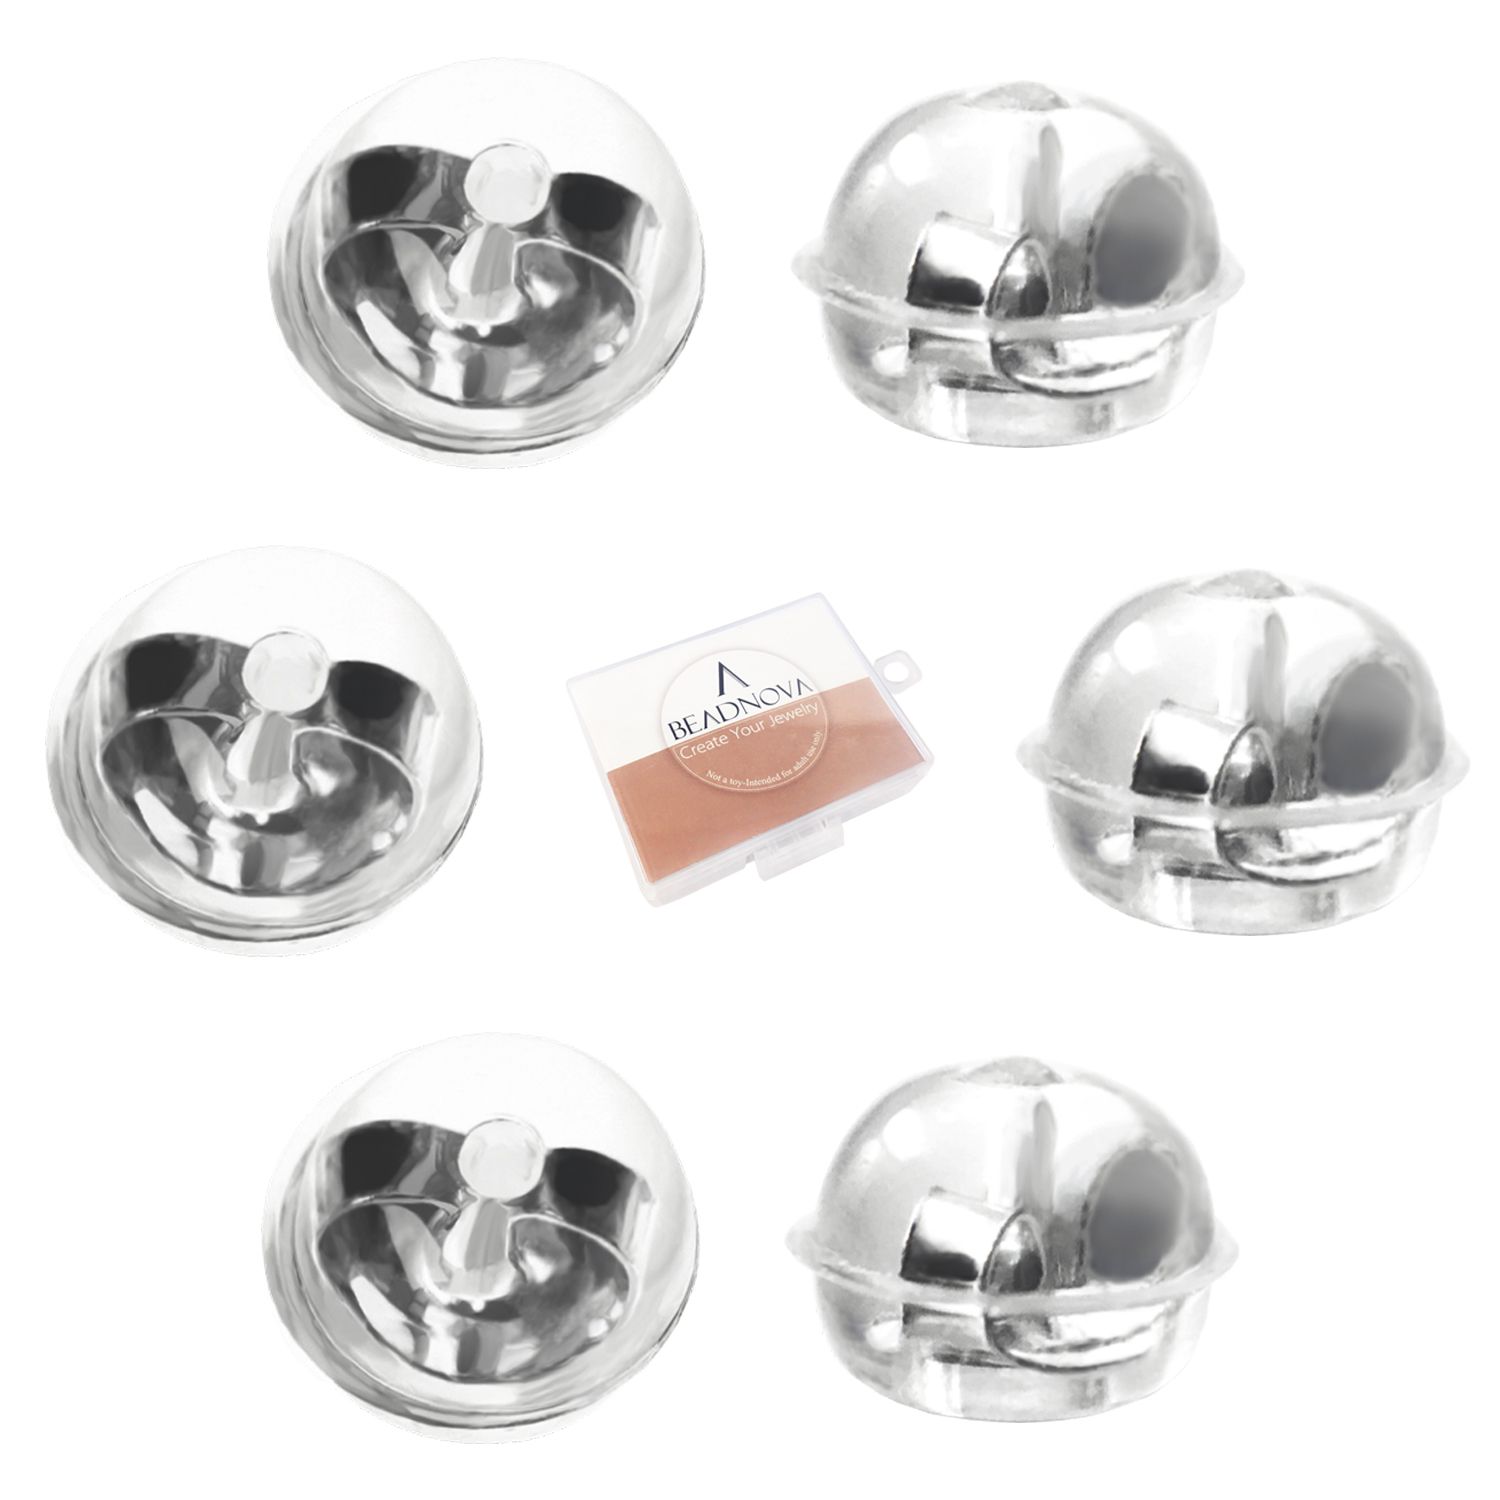 6PCS Real 925 Silver Earring Backs Replacements, Hypoallergenic